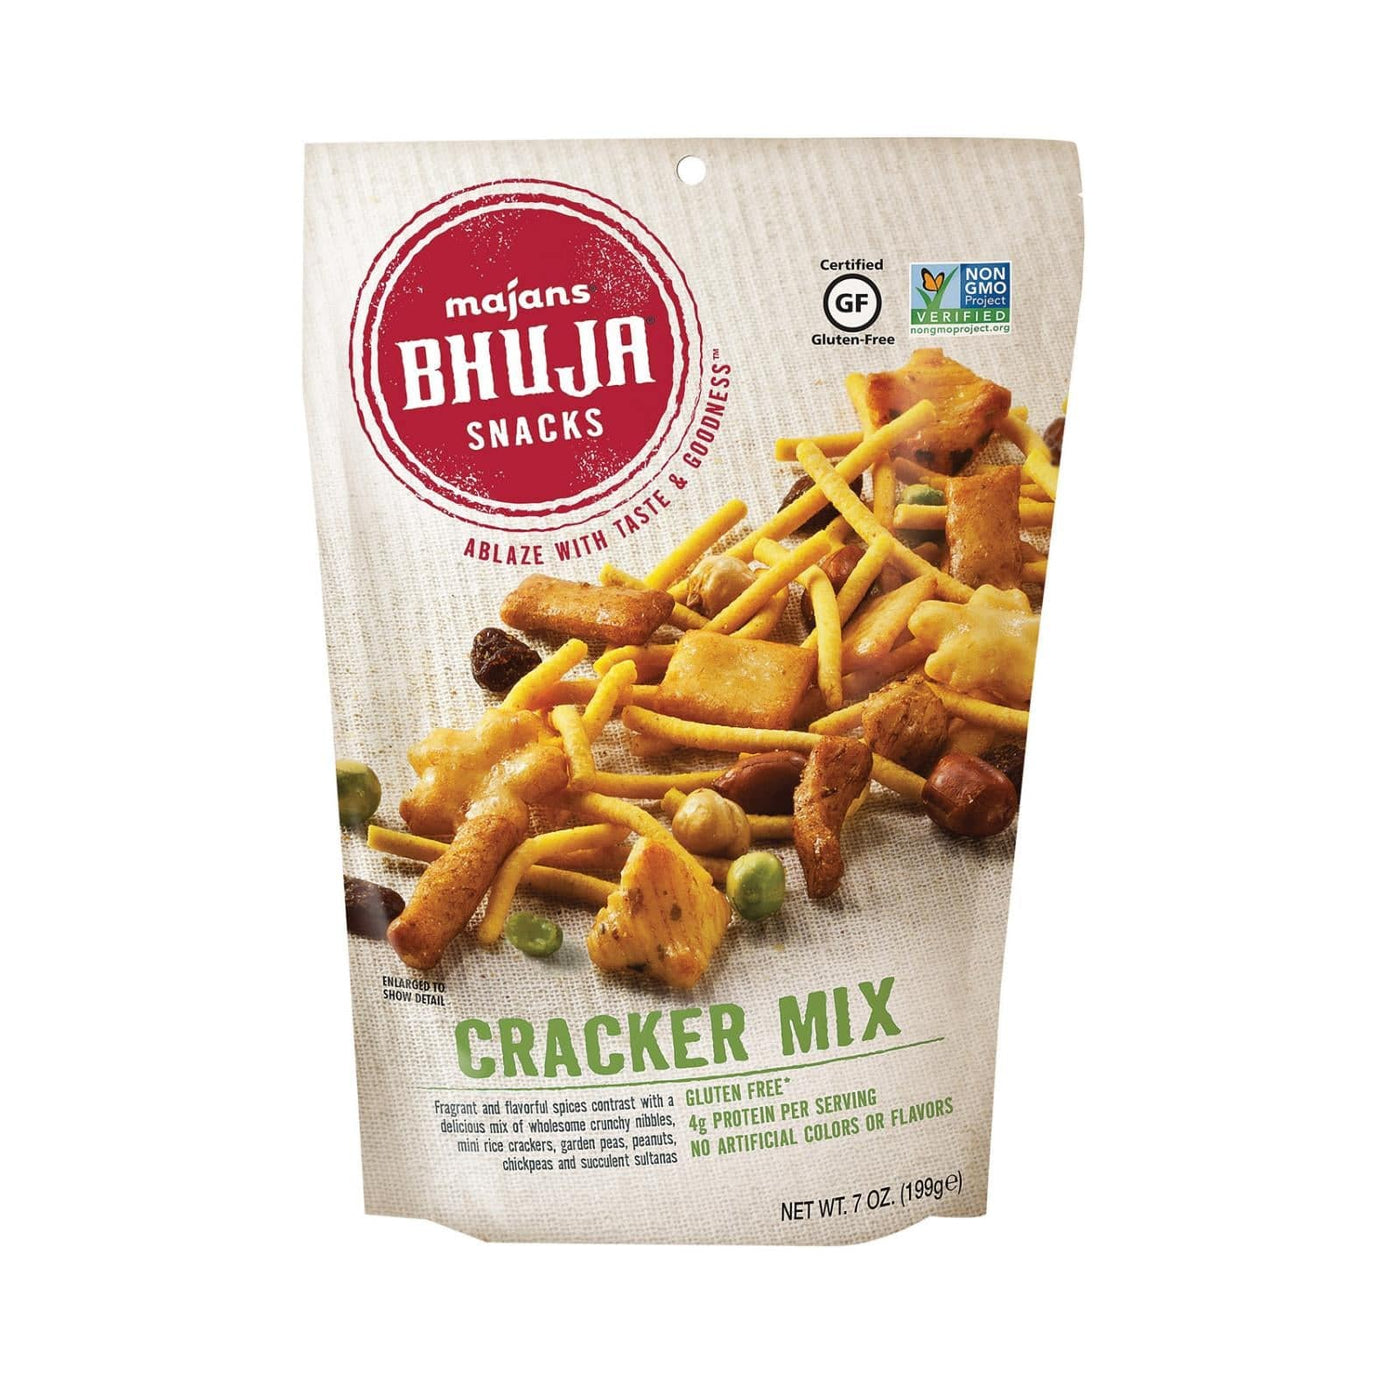 Buy Bhuja Snacks - Cracker Mix - Case Of 6 - 7 Oz.  at OnlyNaturals.us